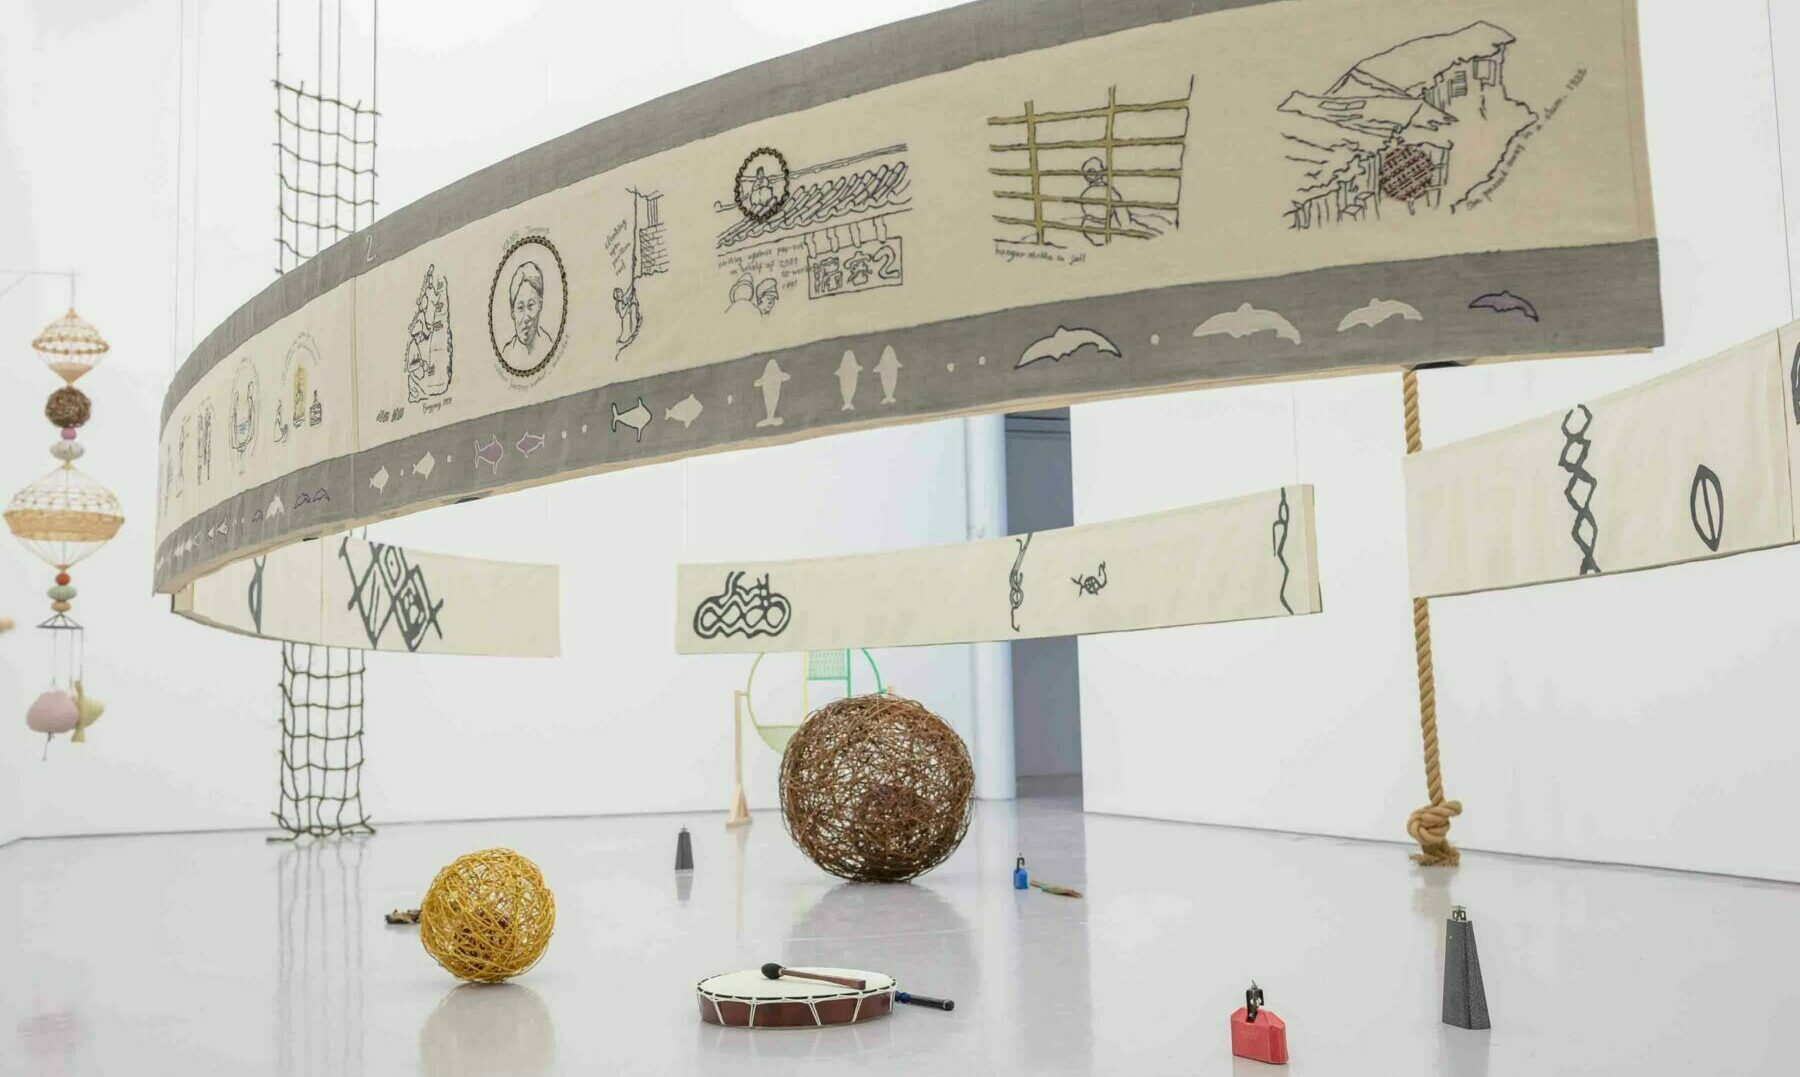 A group of sculptures in a gallery space, including an embroidered fabric panel, instruments and circular woven objects.